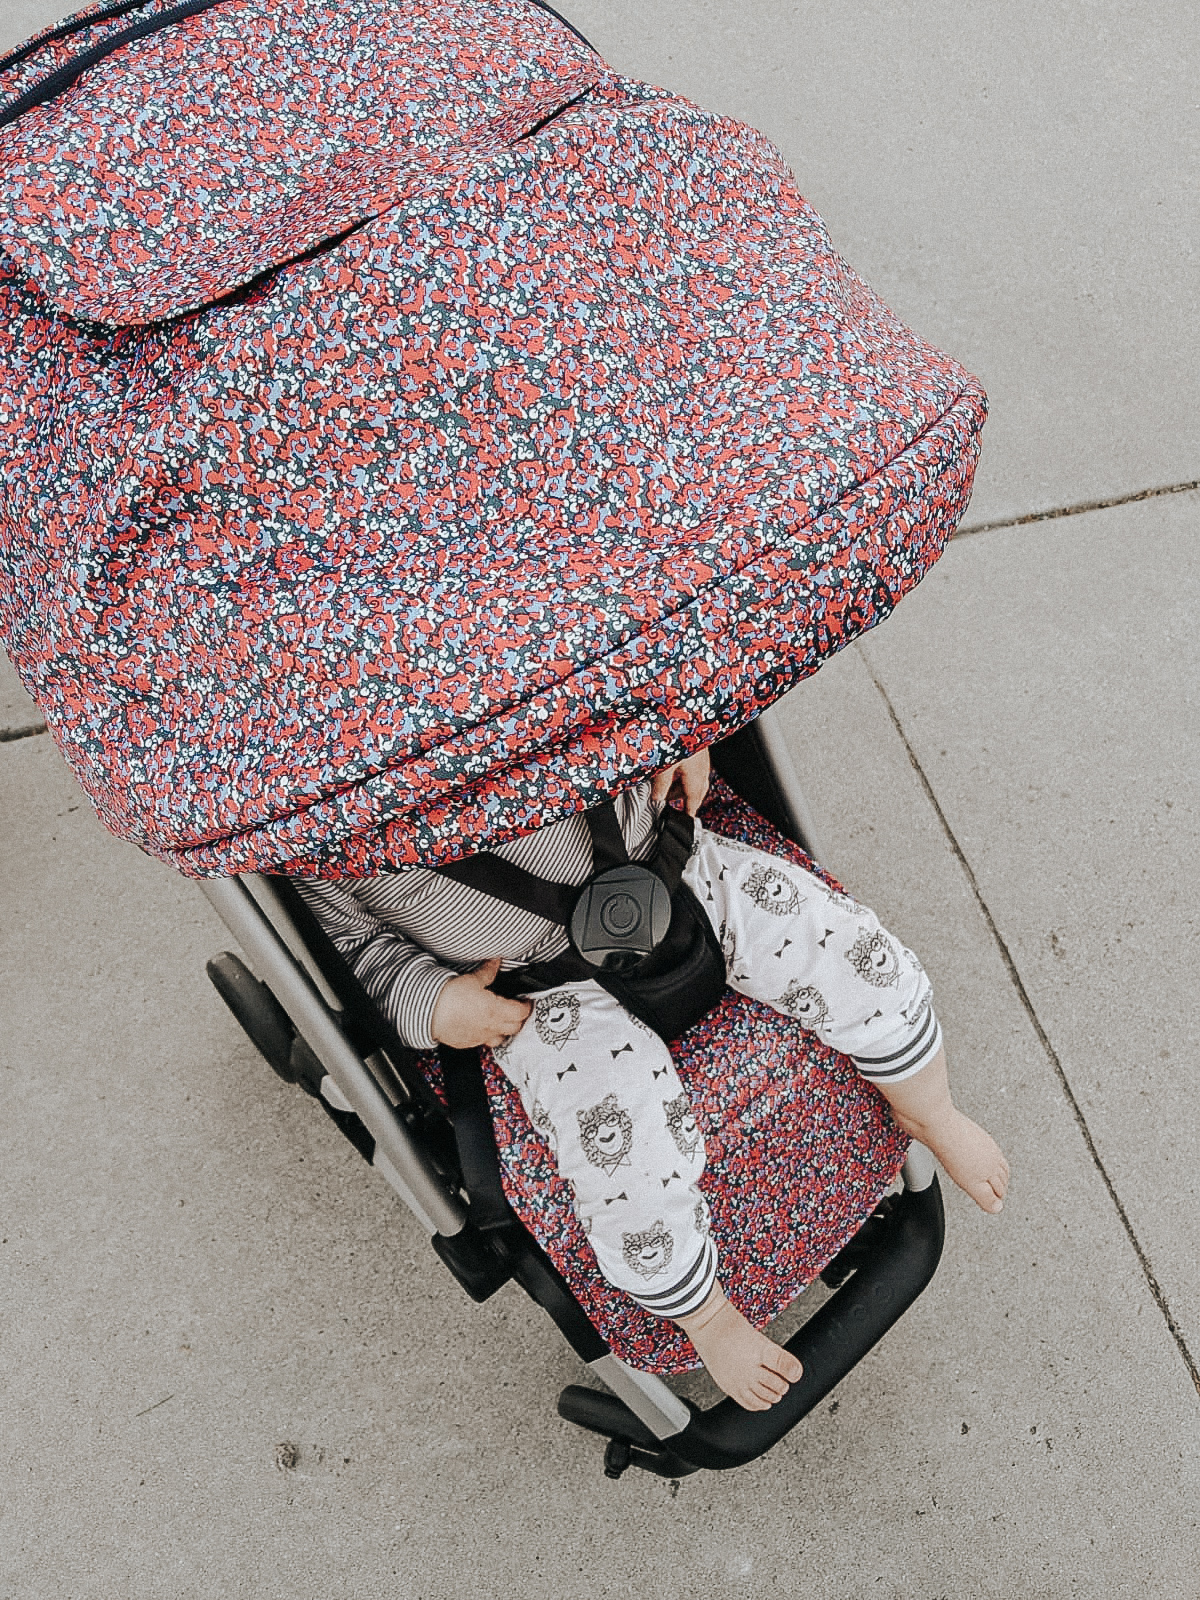 colugo strollers review